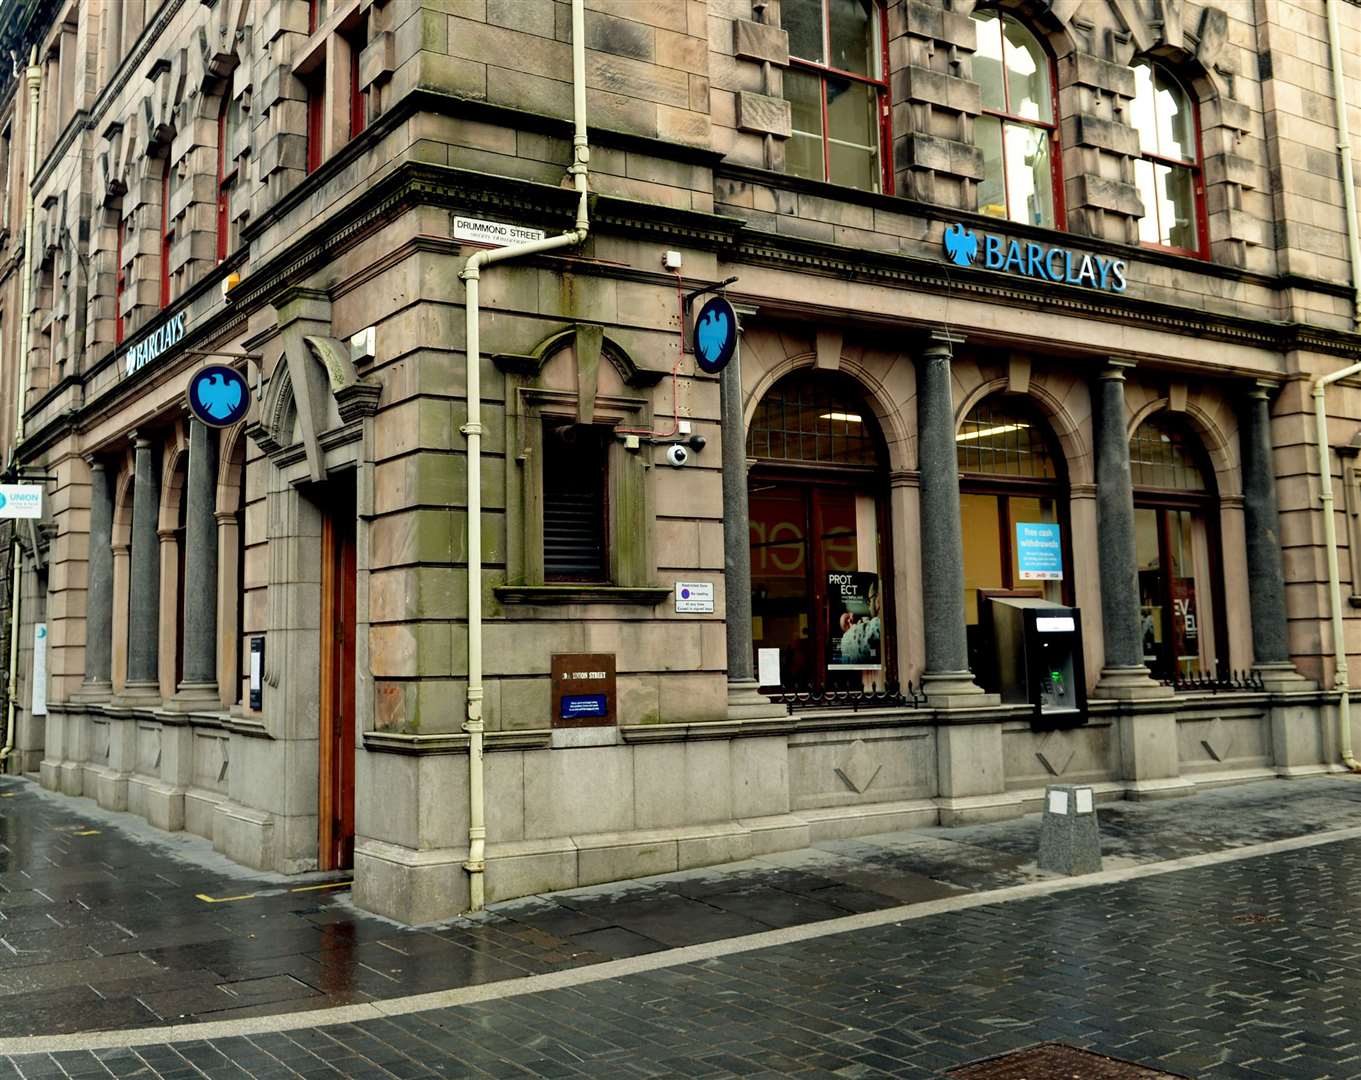 Barclays Bank in Union Street, Inverness.